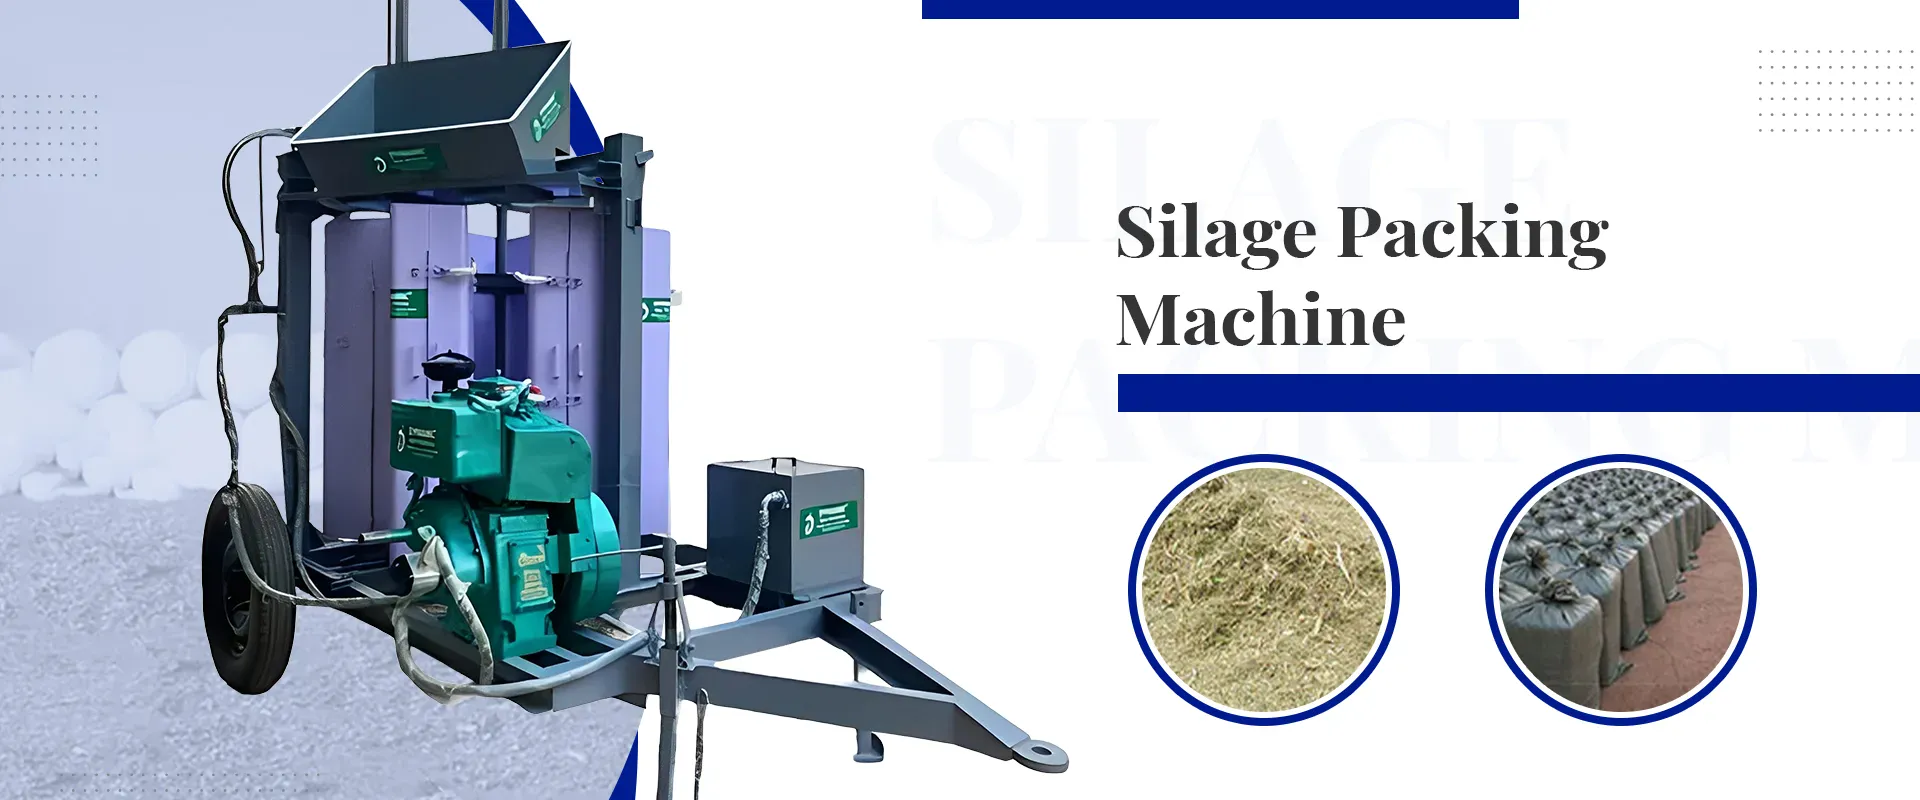 Silage Packing Machine In Houston